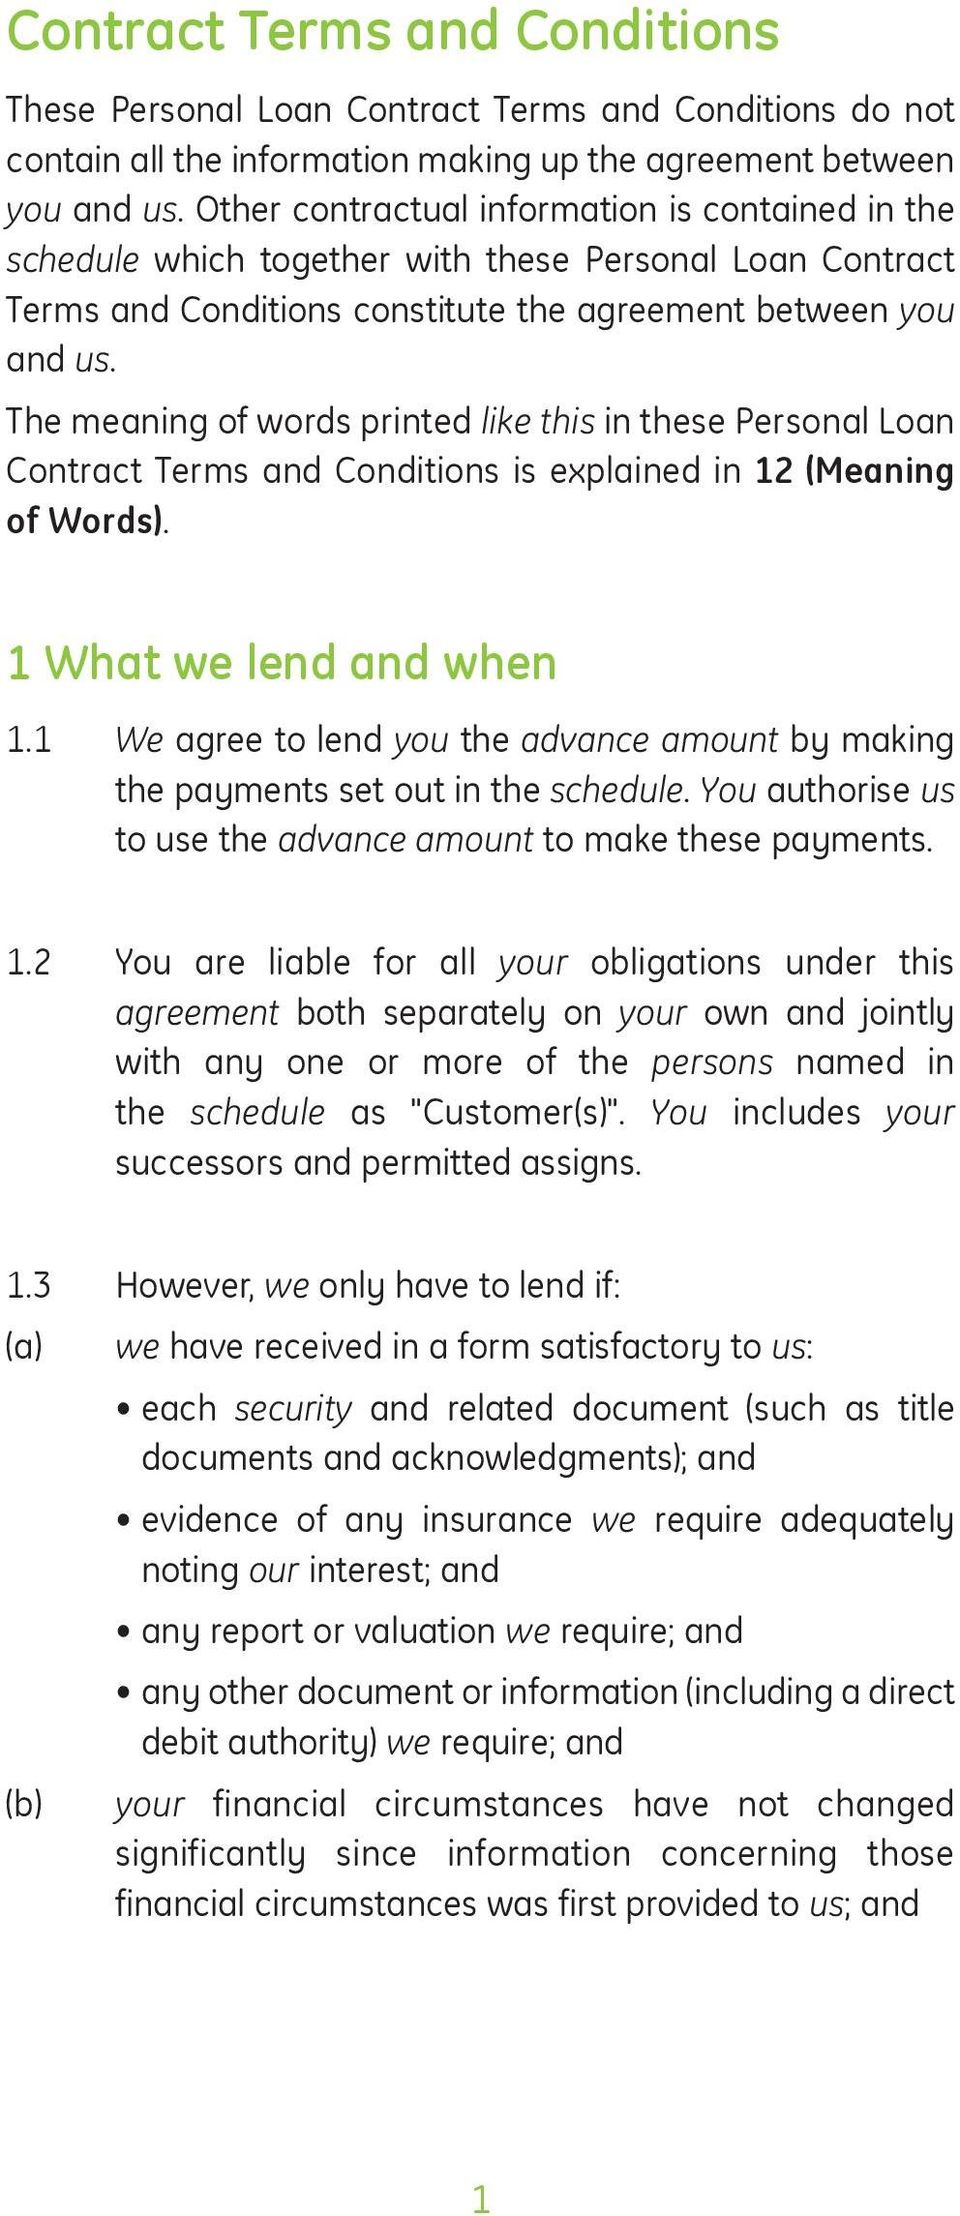 The meaning of words printed like this in these Personal Loan Contract Terms and Conditions is explained in 12 (Meaning of Words). 1 What we lend and when 1.